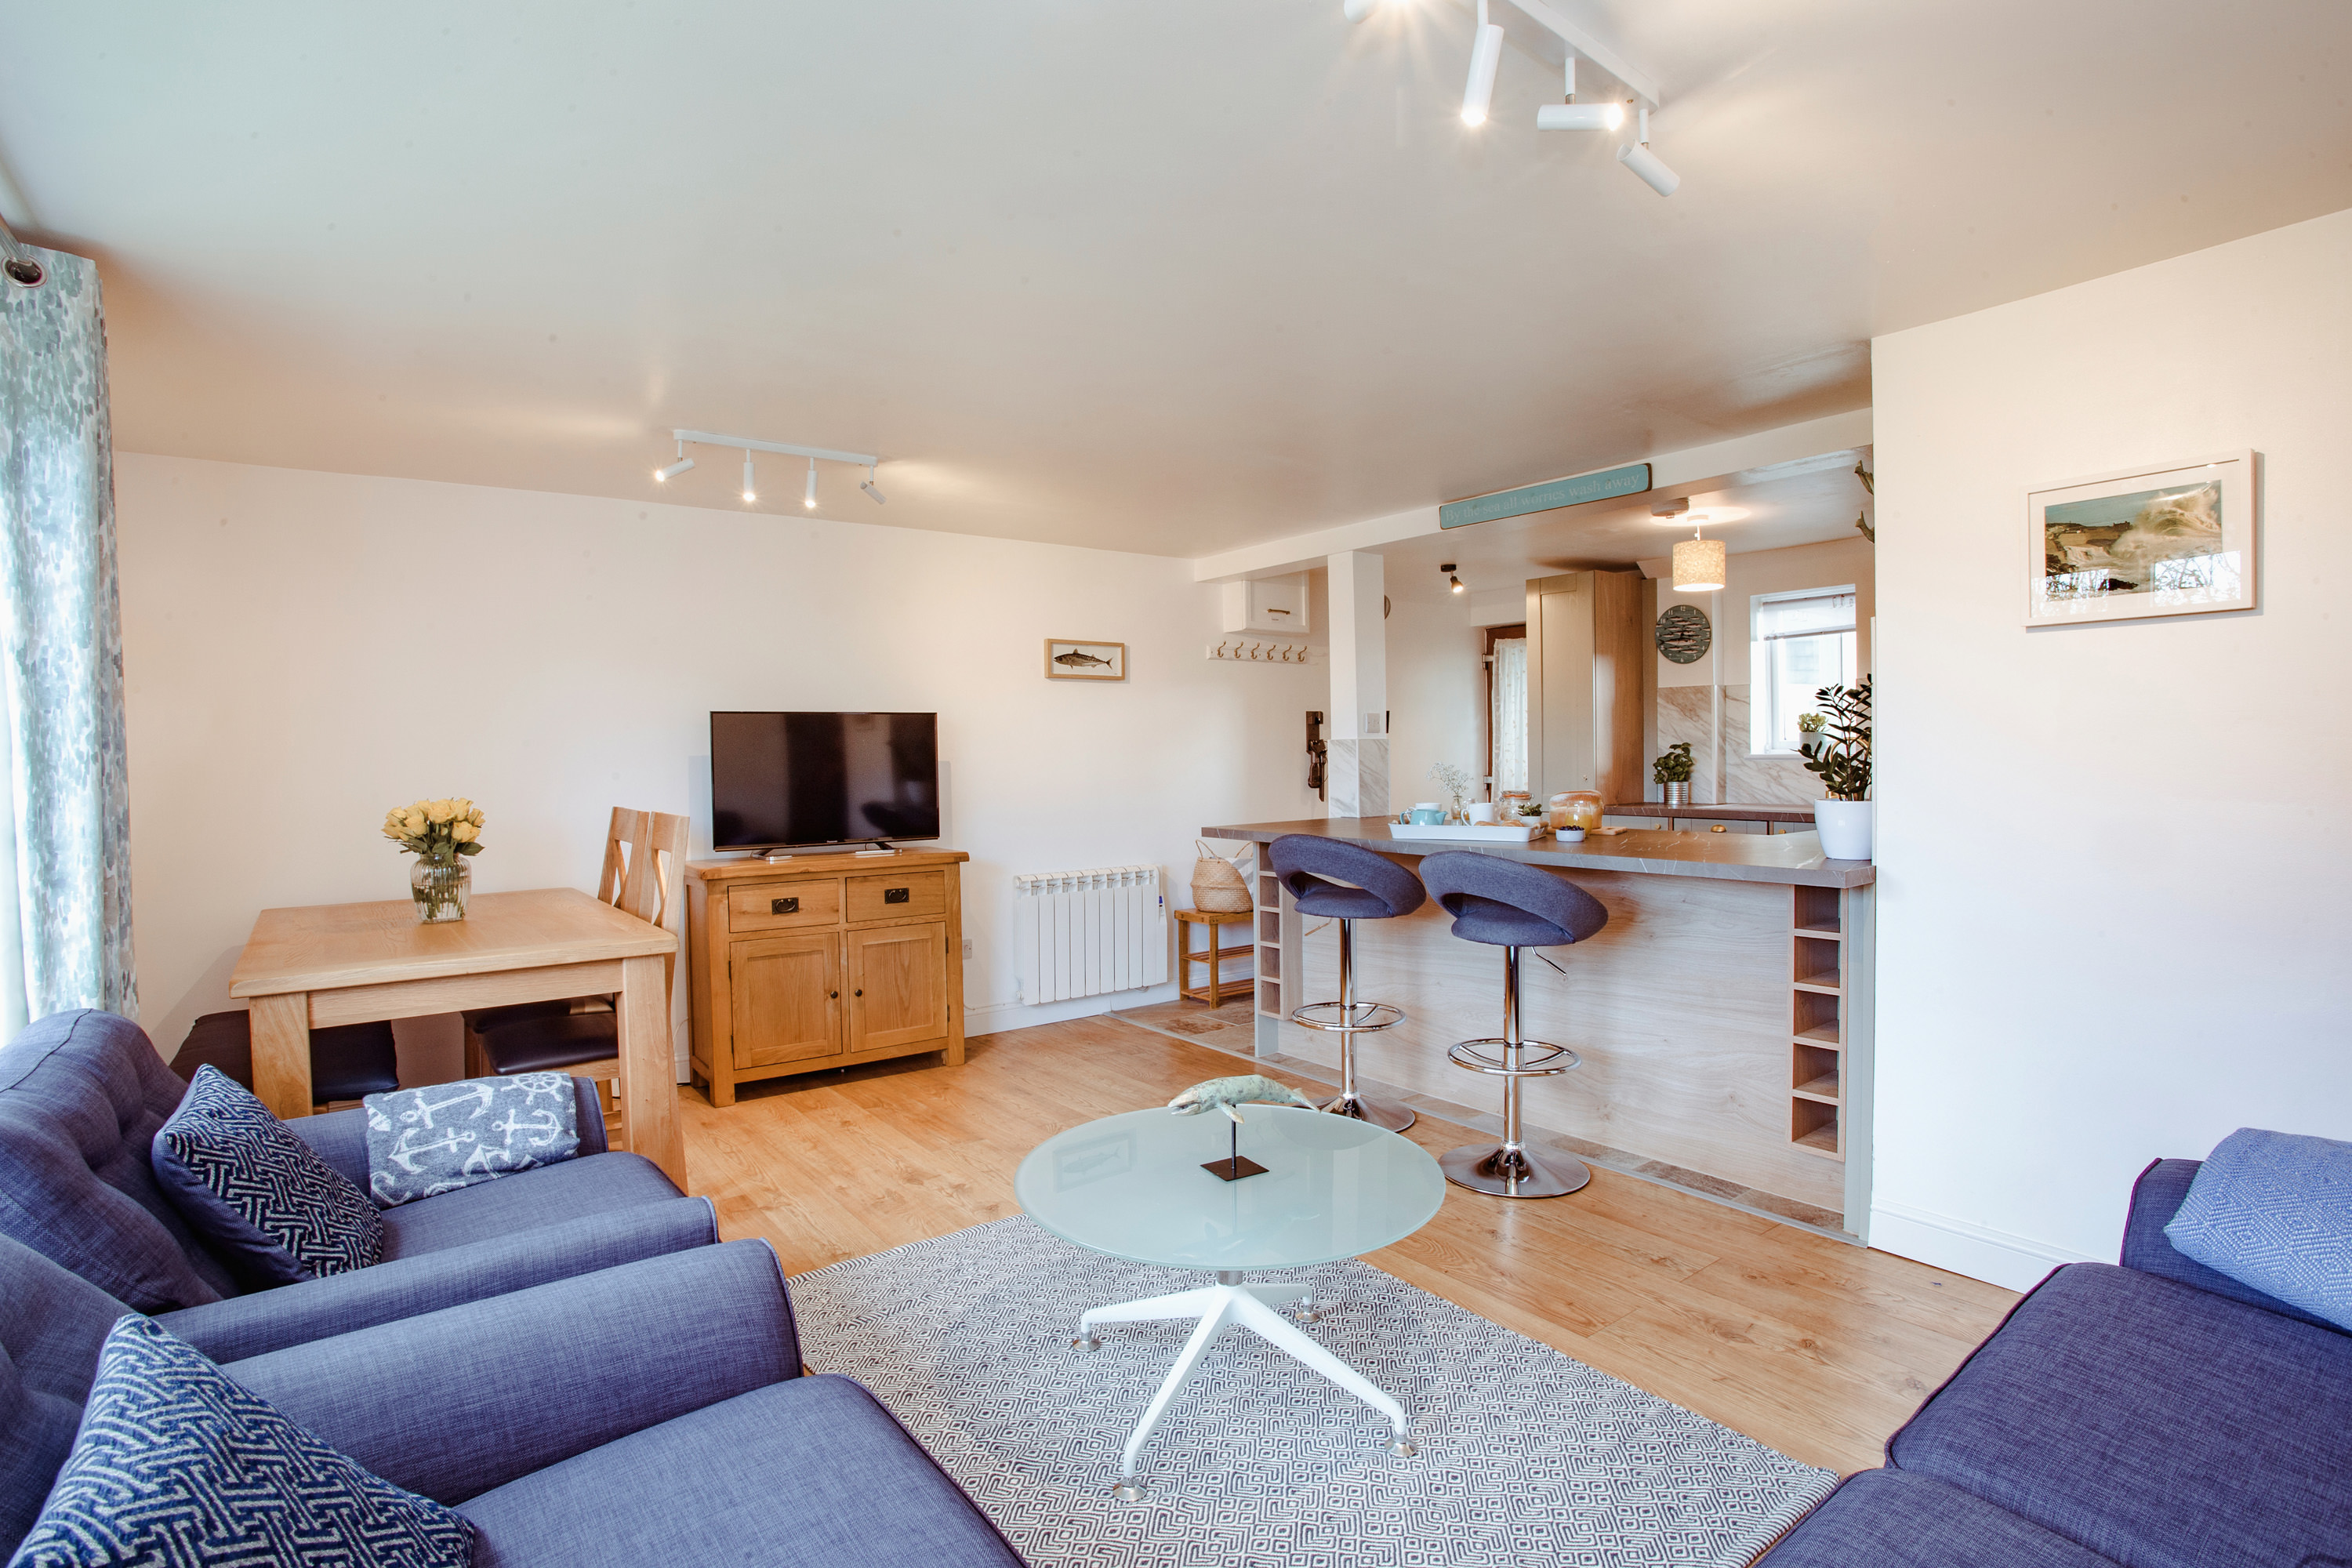 Penhwedhi a self-catering holiday home in Polzeath, North Cornwall